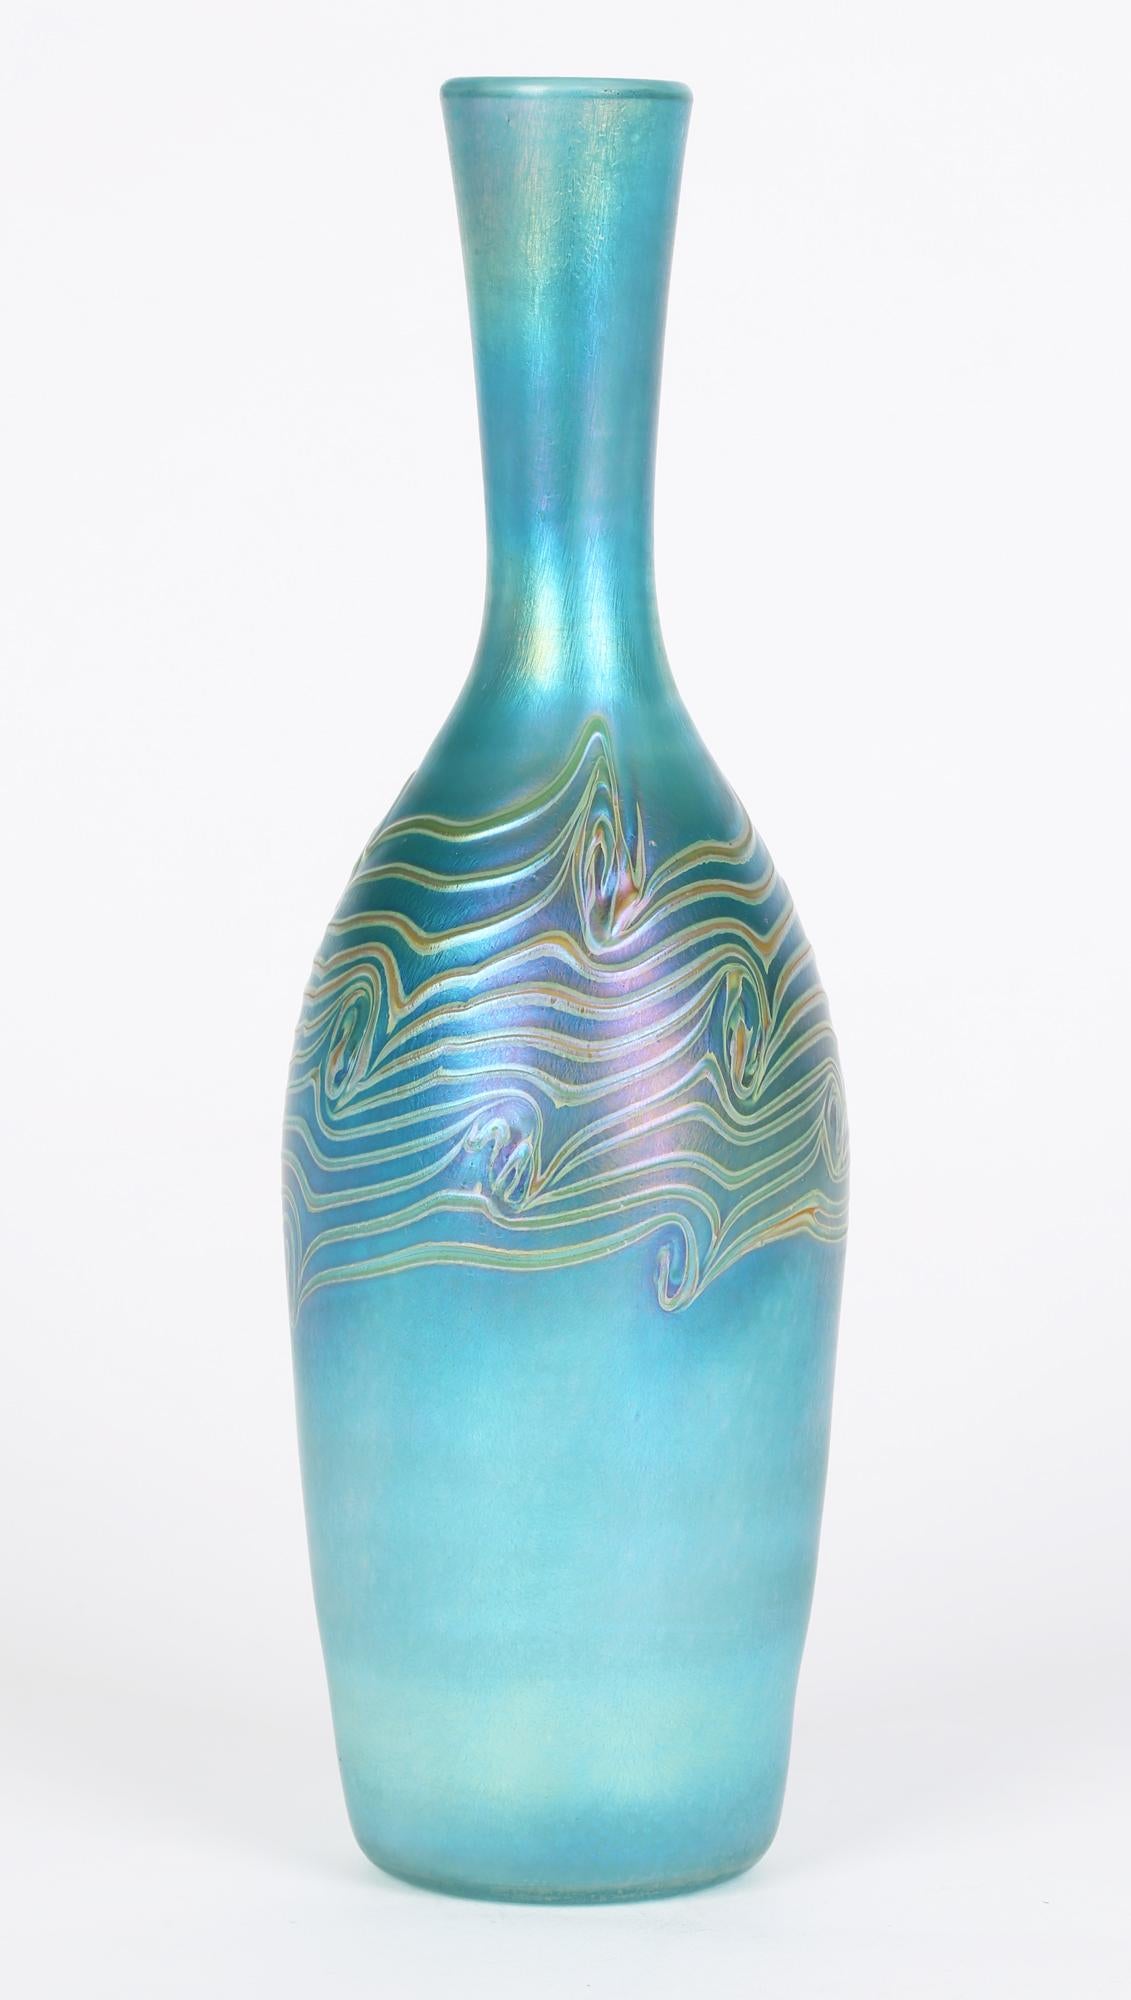 Modern Iridescent Blue Bottle Shaped Art Glass Vase with Peacock Feather Trailing For Sale